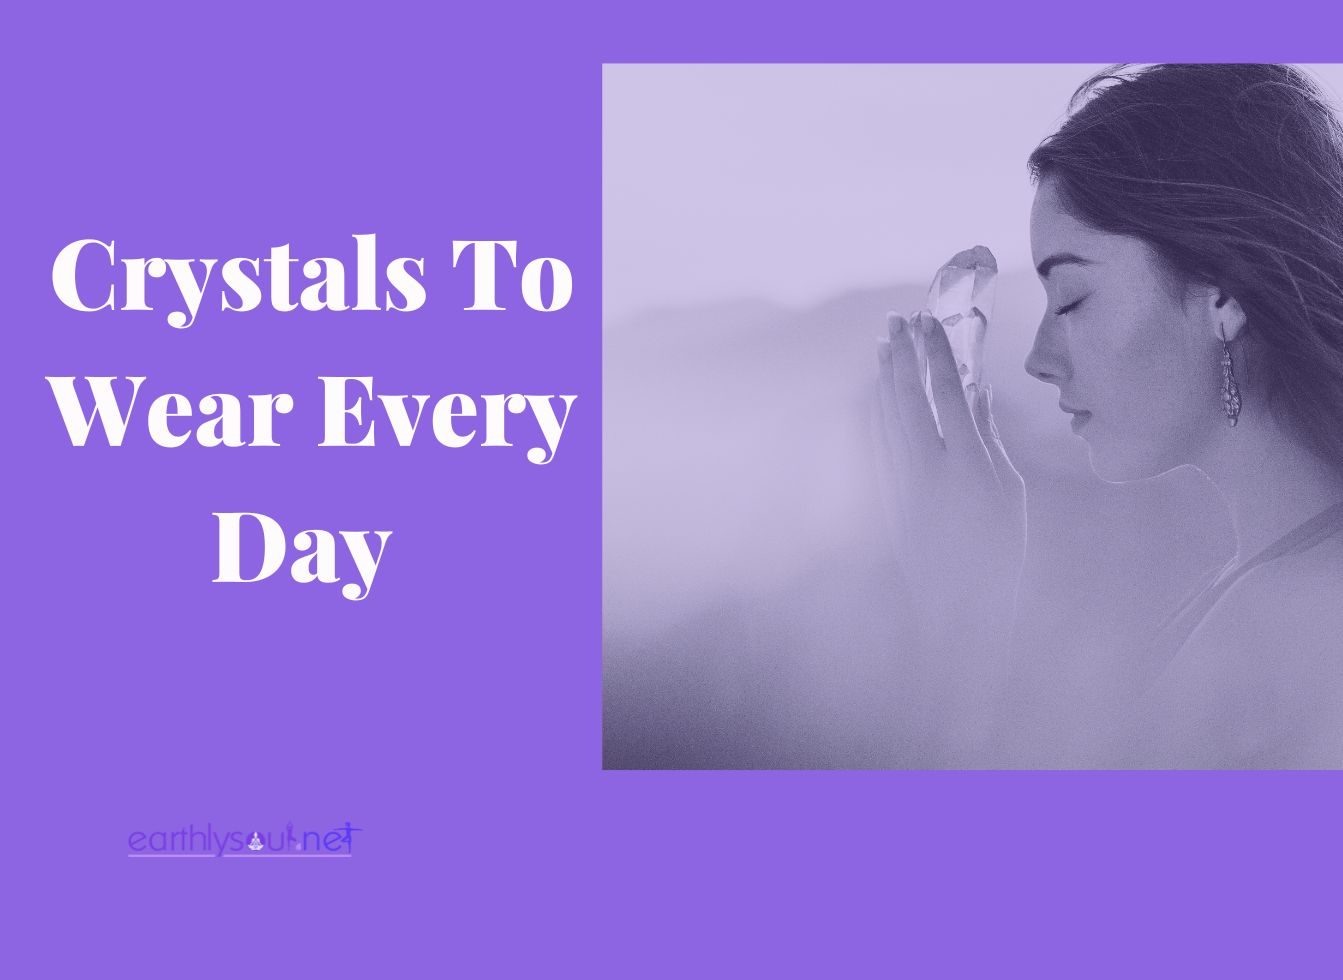 Crystals to wear ever day featured image